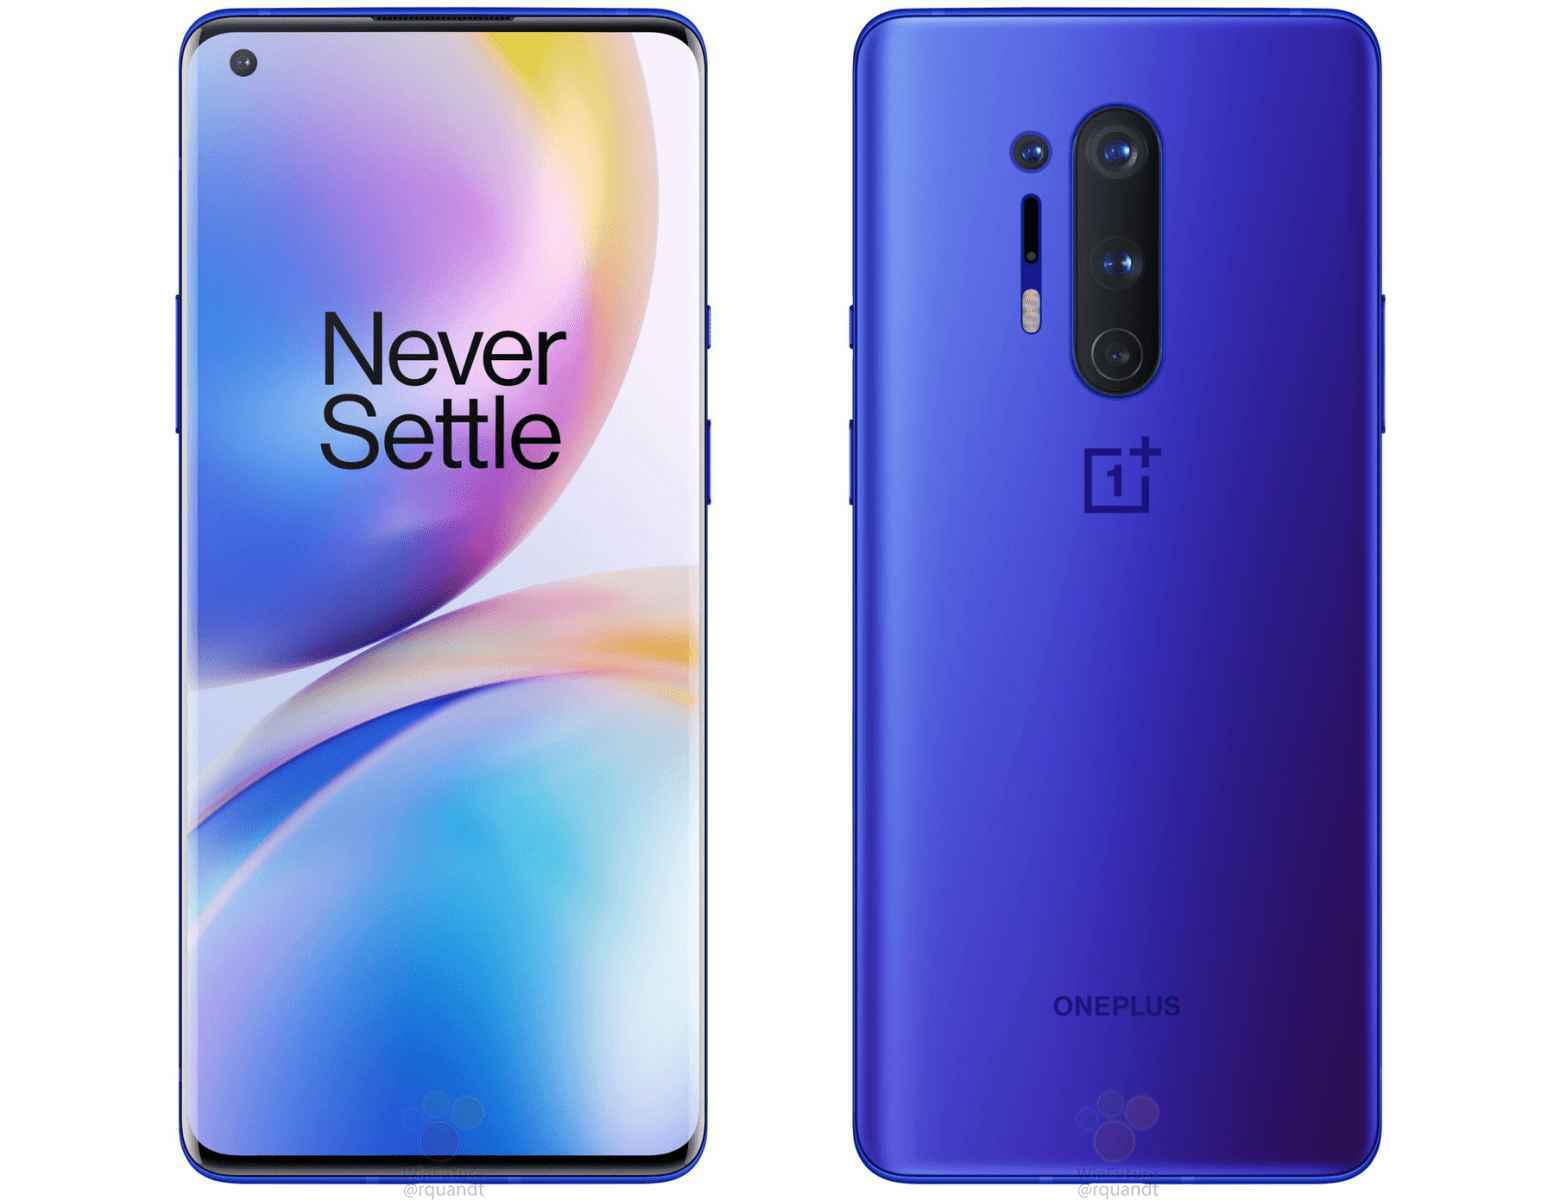 Take a look at the OnePlus 8 Pro 5G in all official colors